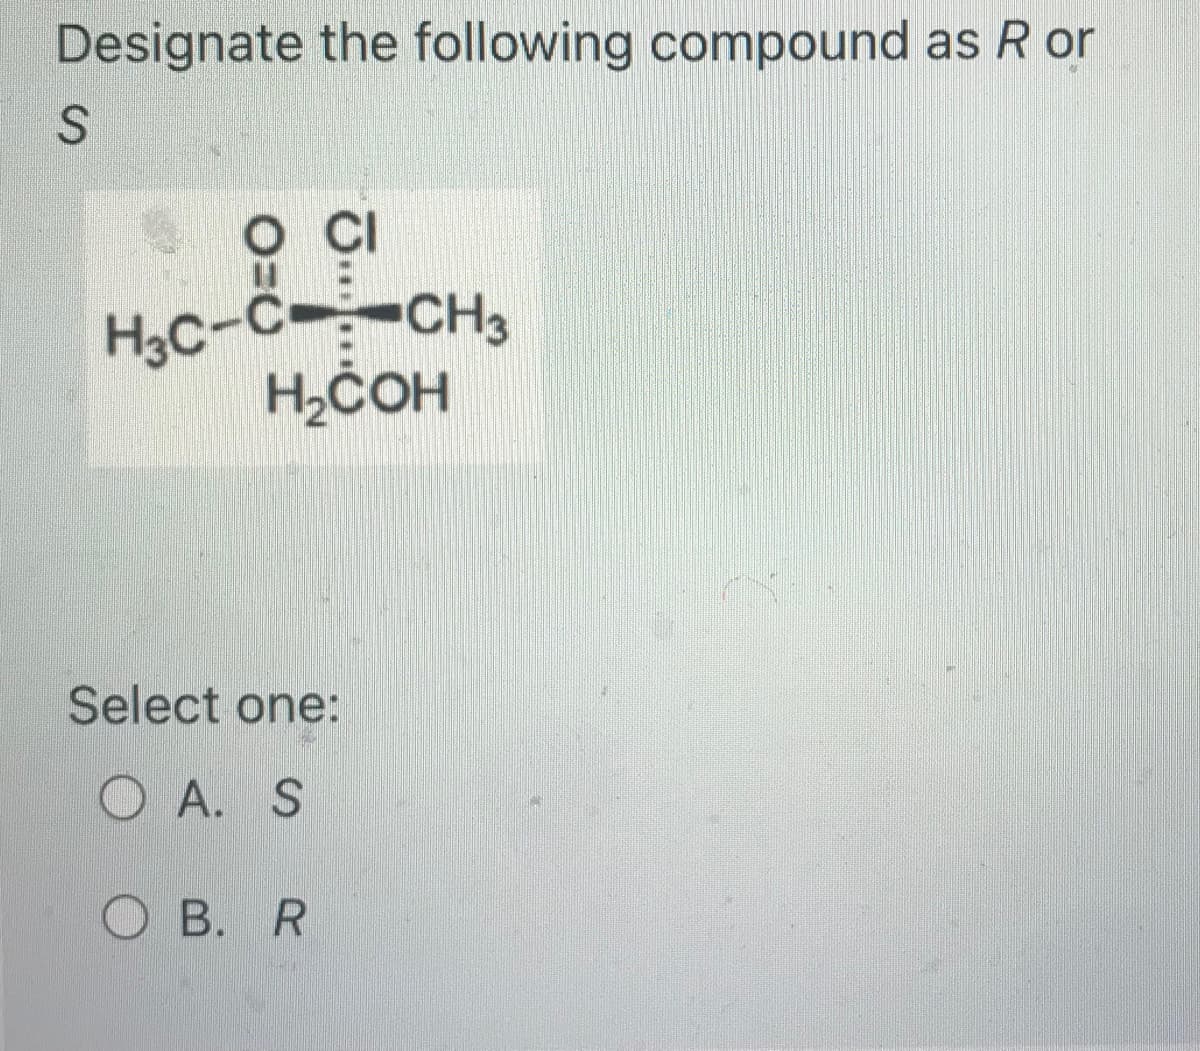 Designate the following compound as R or
S
O CI
H₂C-C- CH3
H₂COH
Select one:
OA. S
OB. R